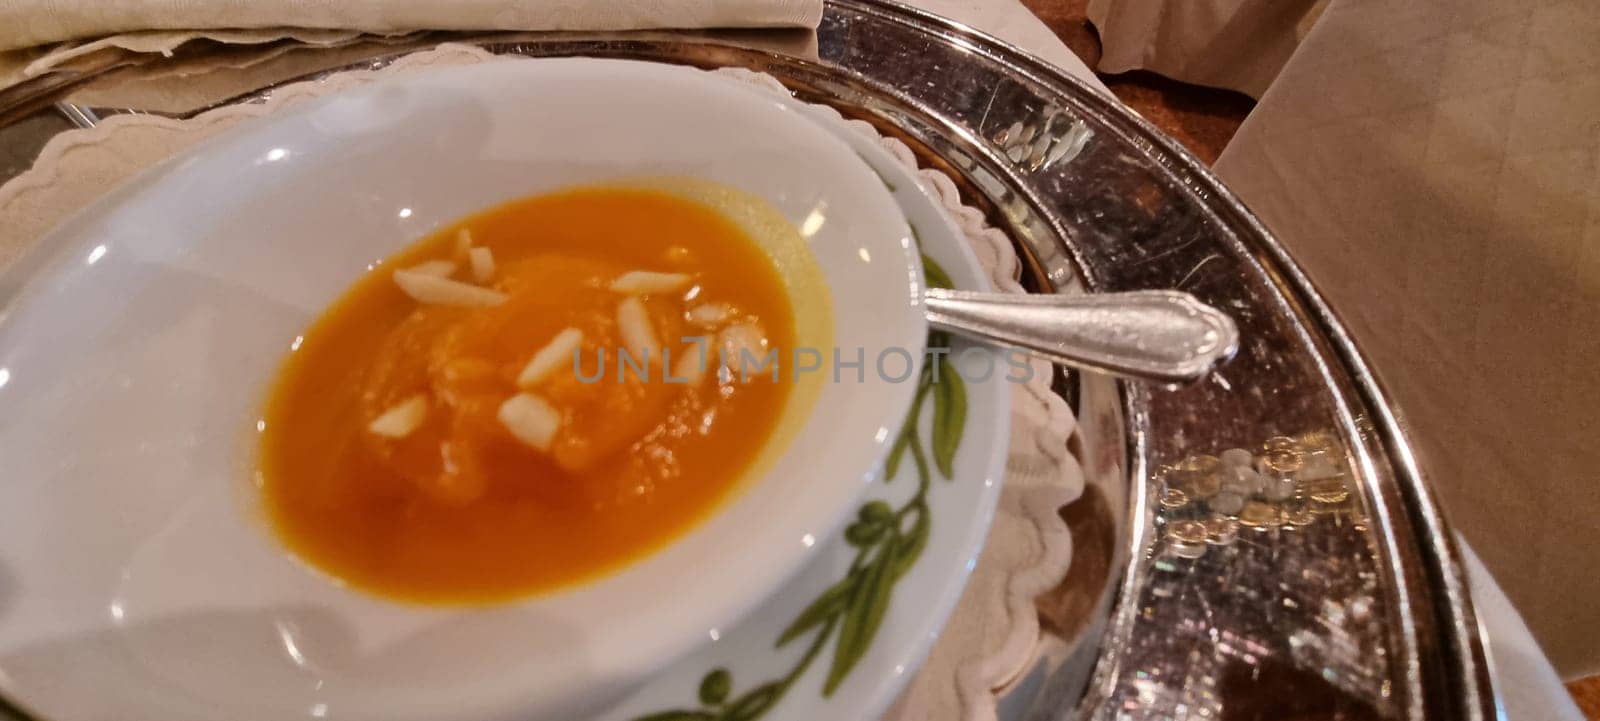 Close-up of a delicious pumpkin soup garnished with almonds, ready to be served